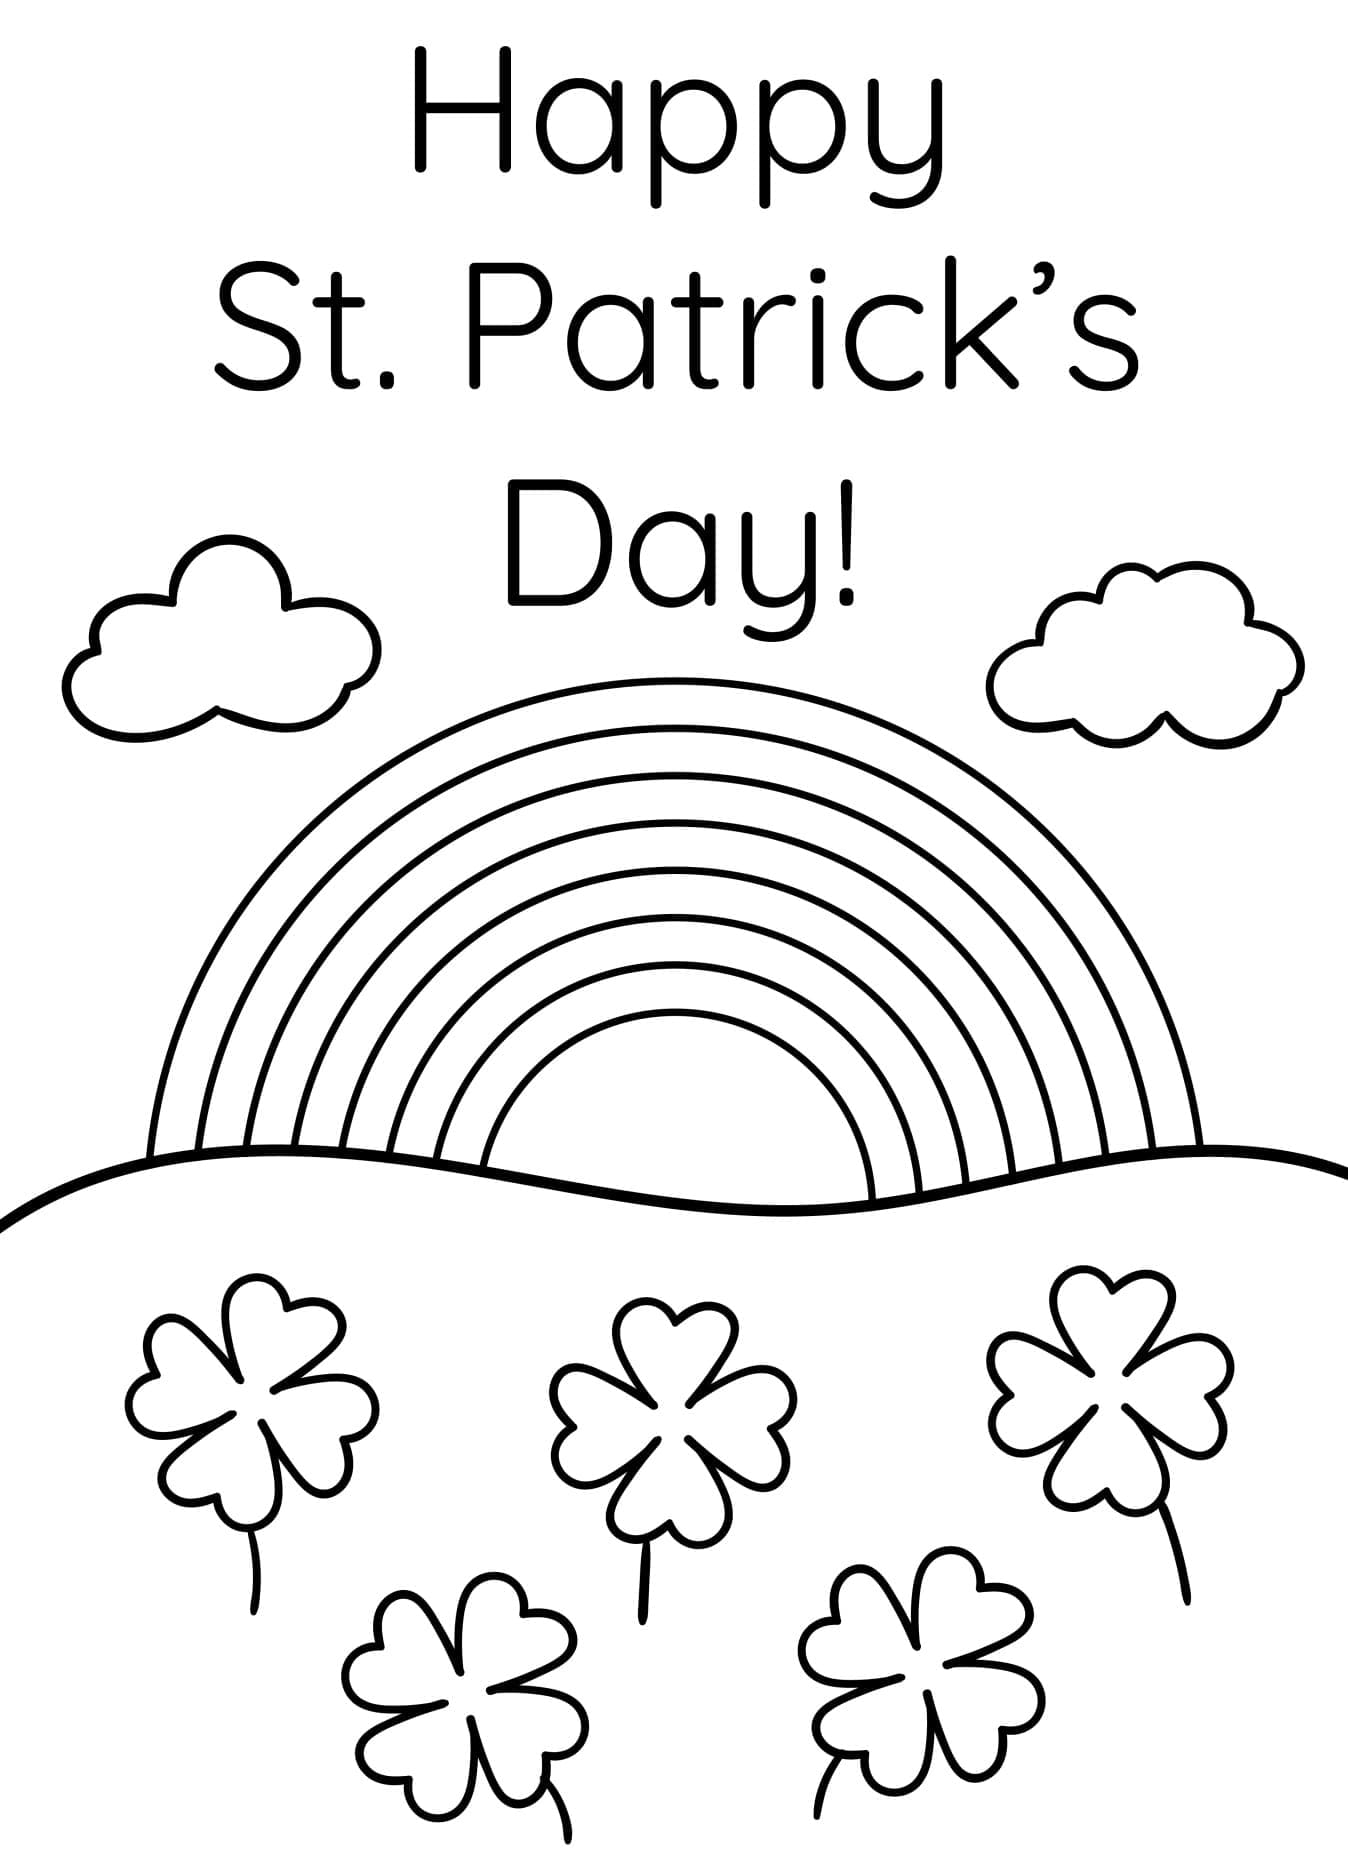 St patricks day with rainbow coloring page